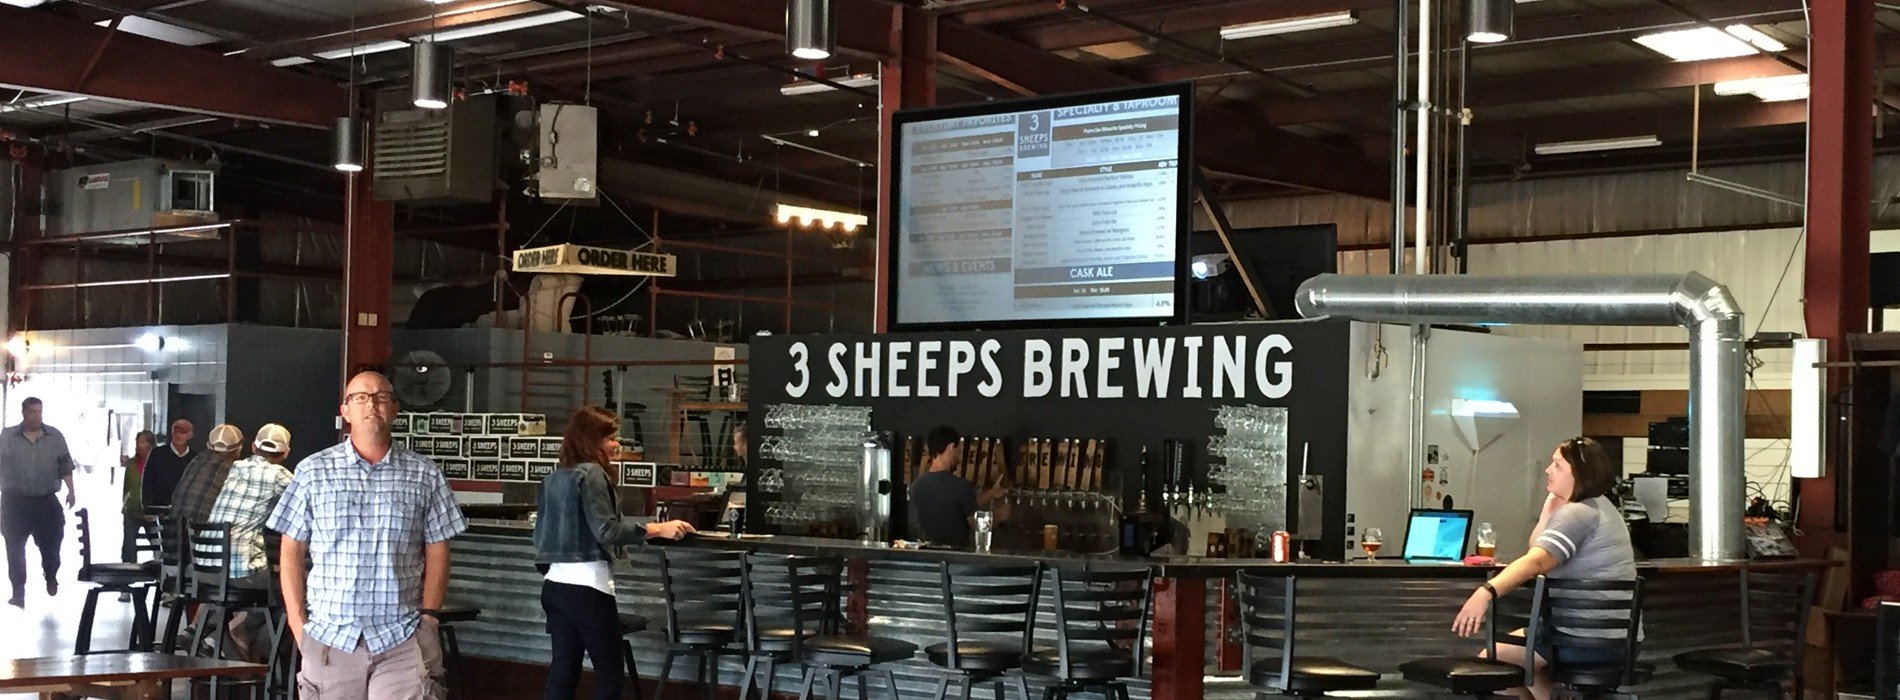 3 Sheeps Brewing brewery from United States